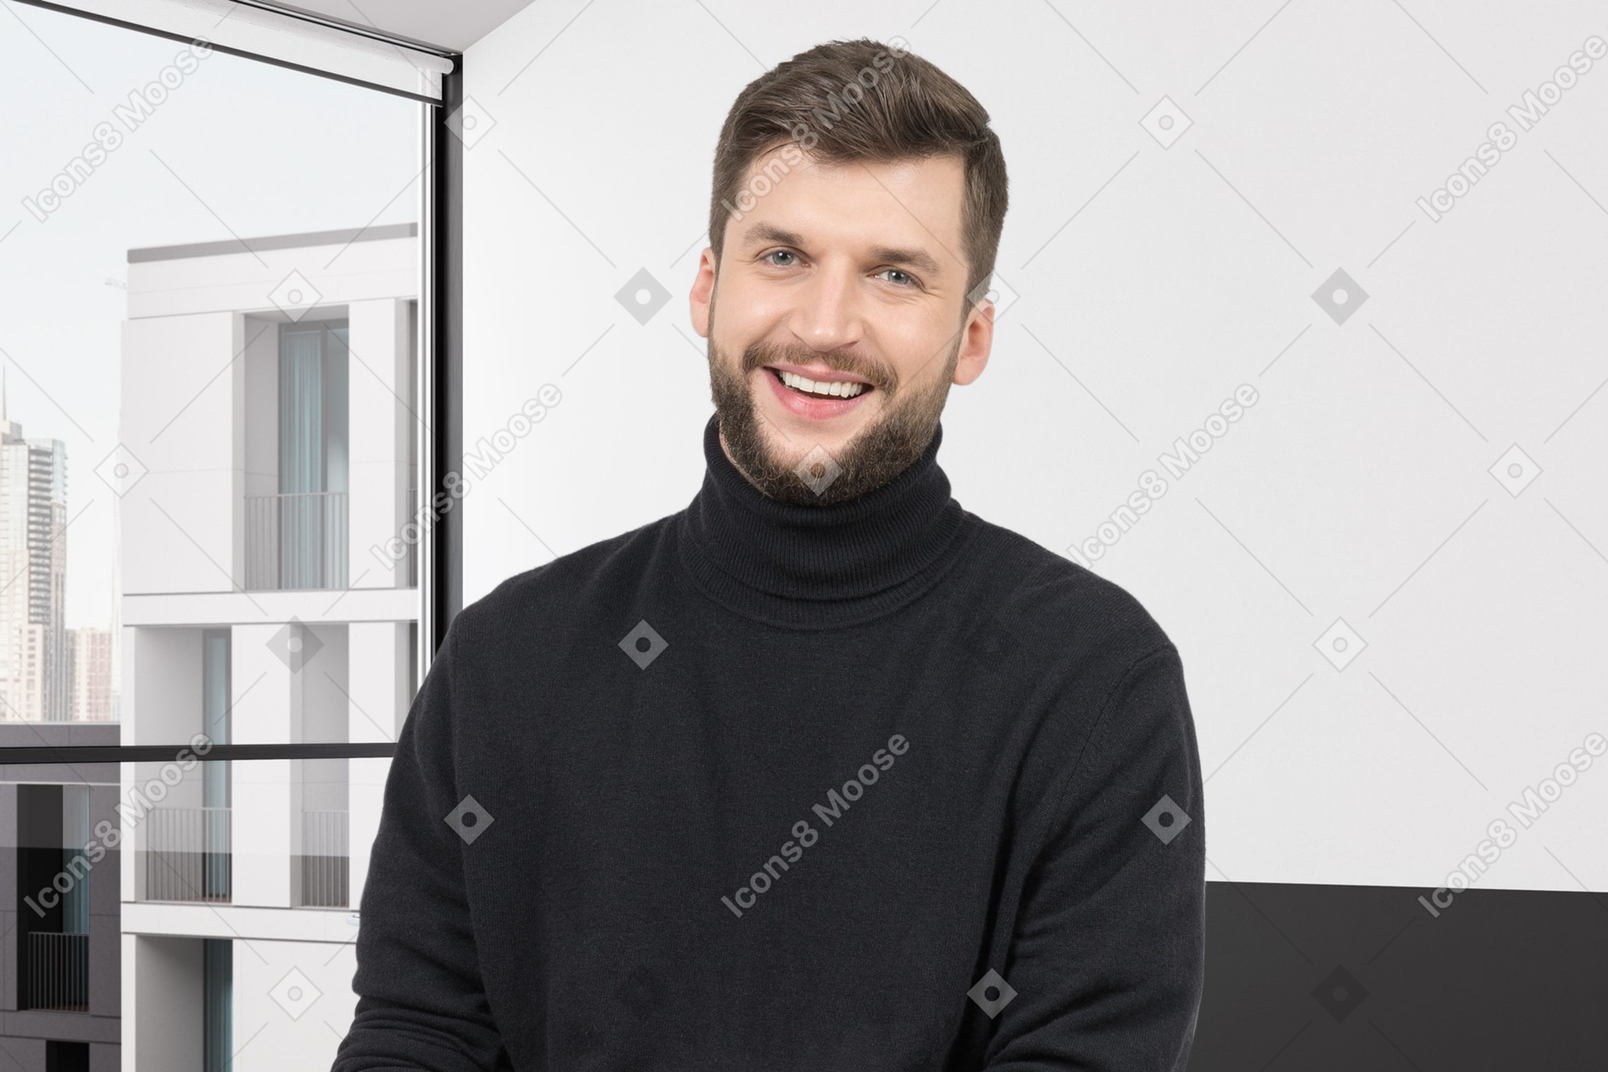 Smiling young man standing in a room